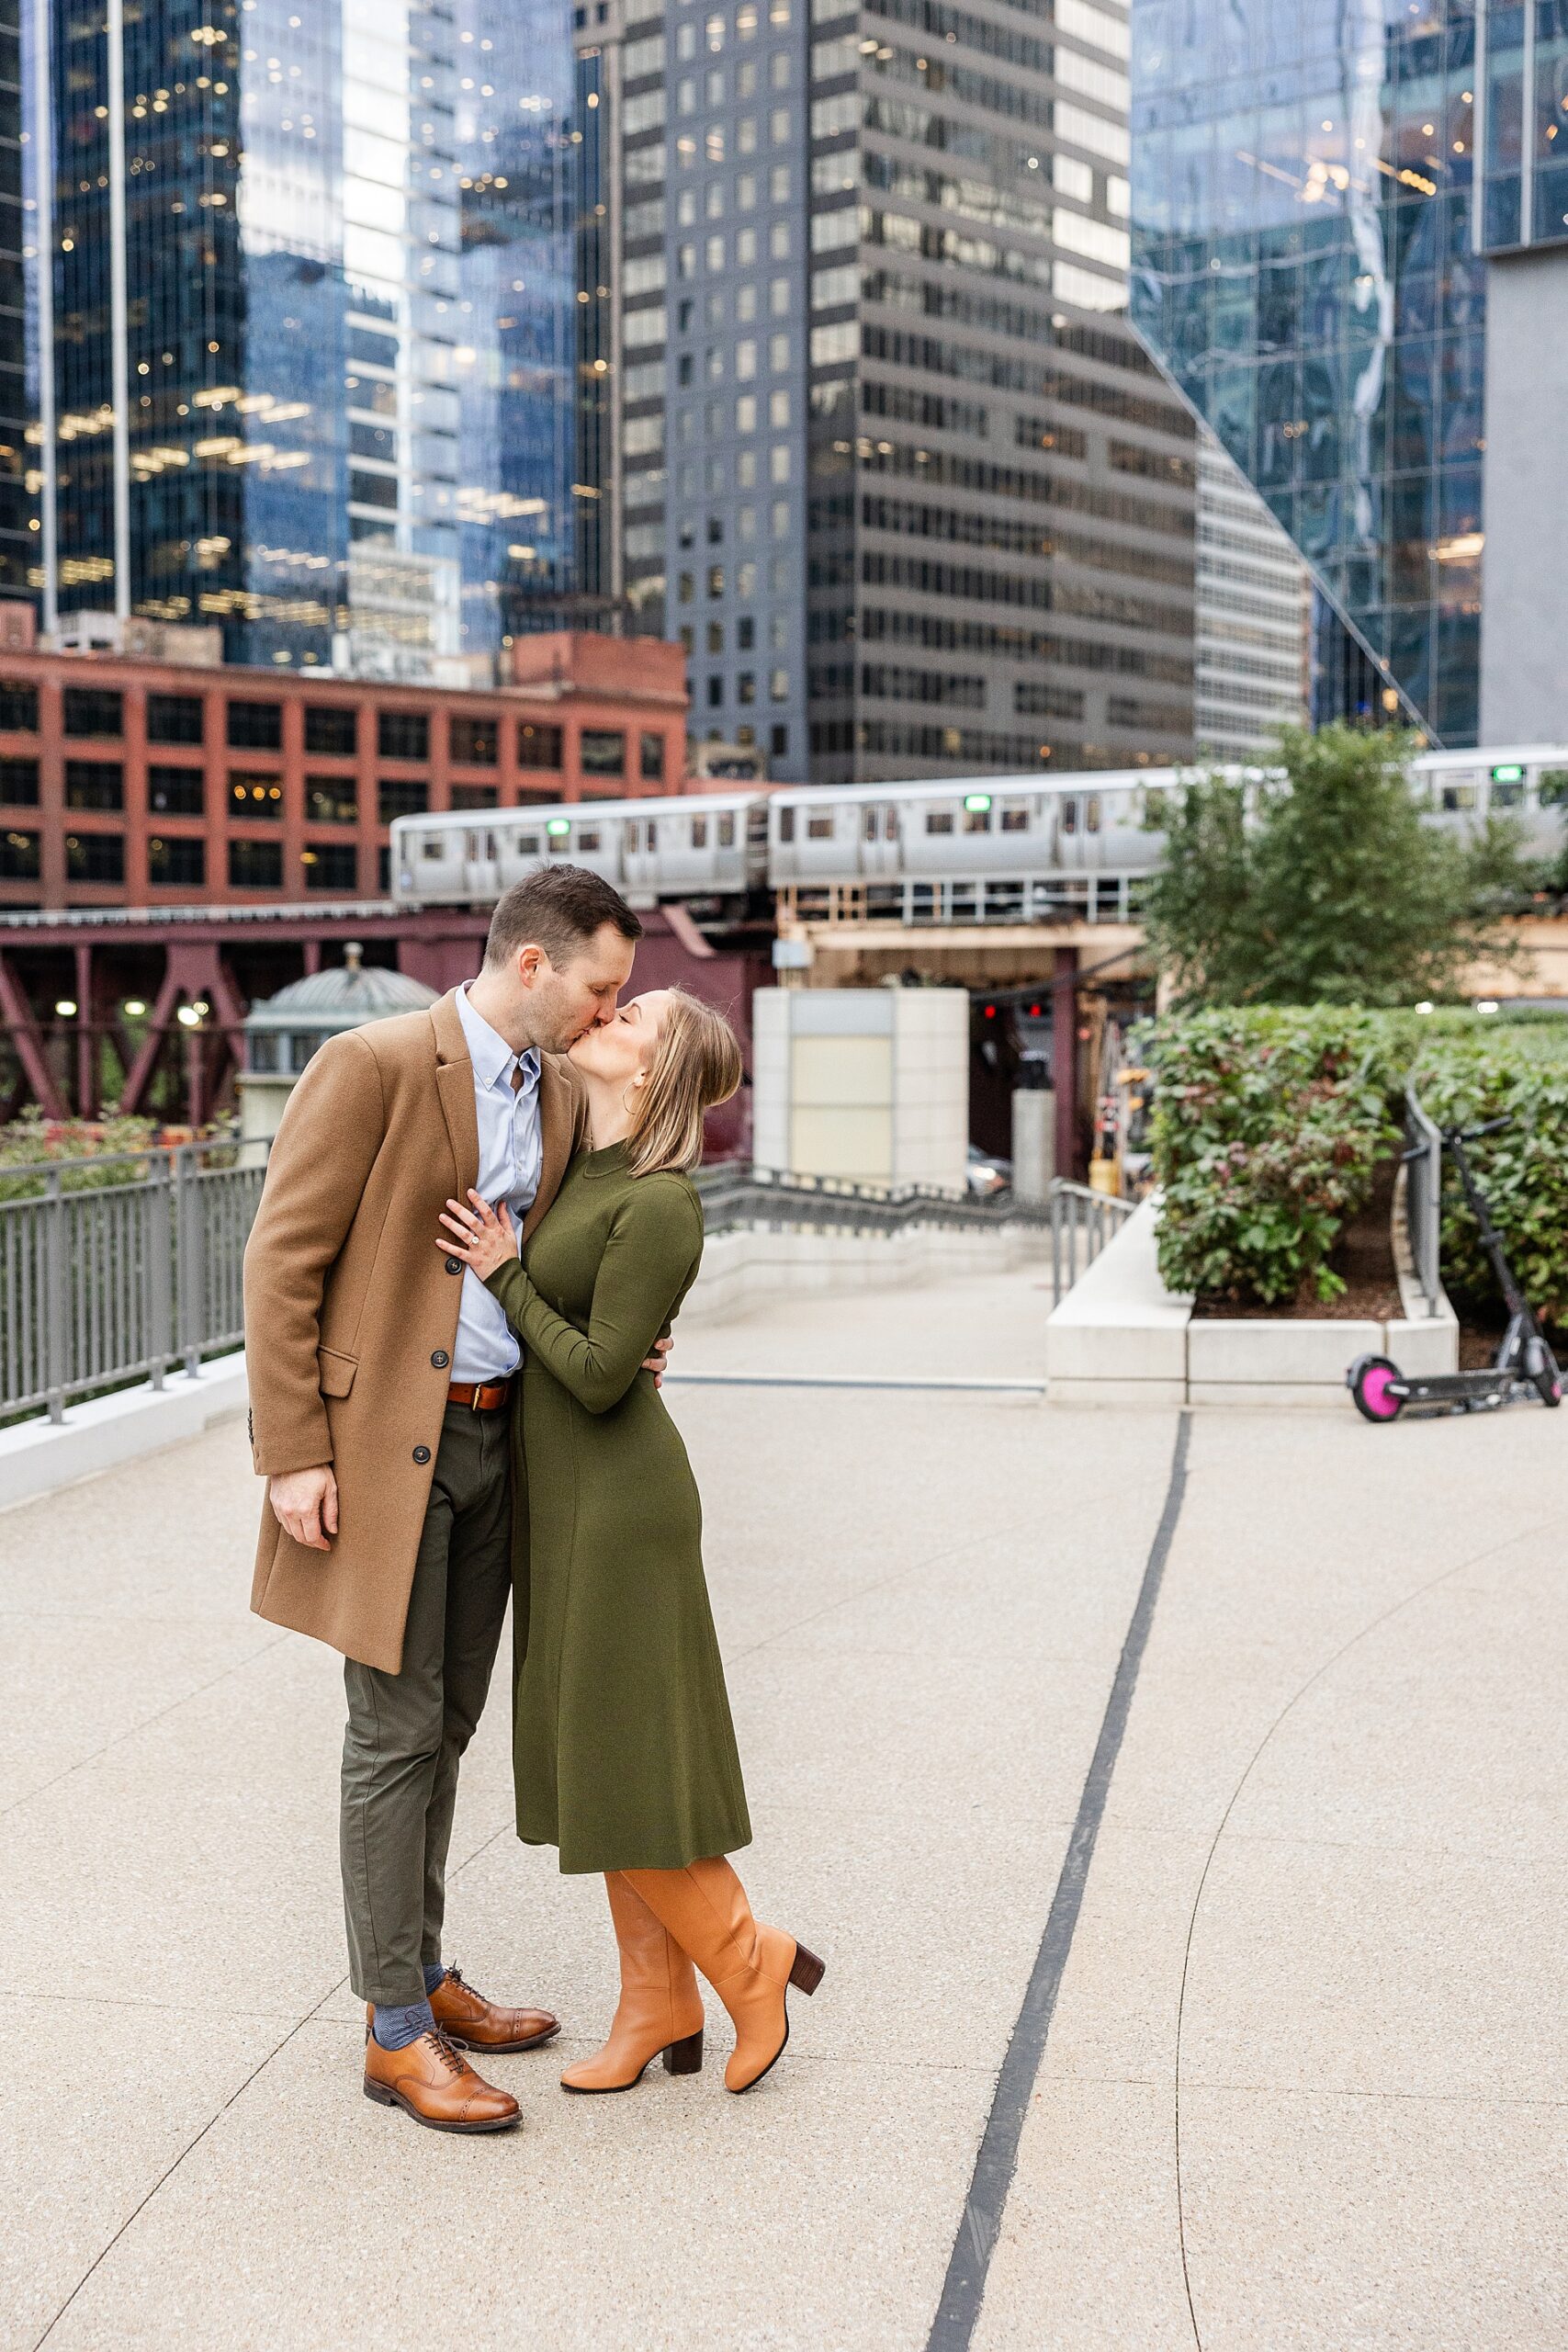 timeless engagement photos at Chicago Rivewalk